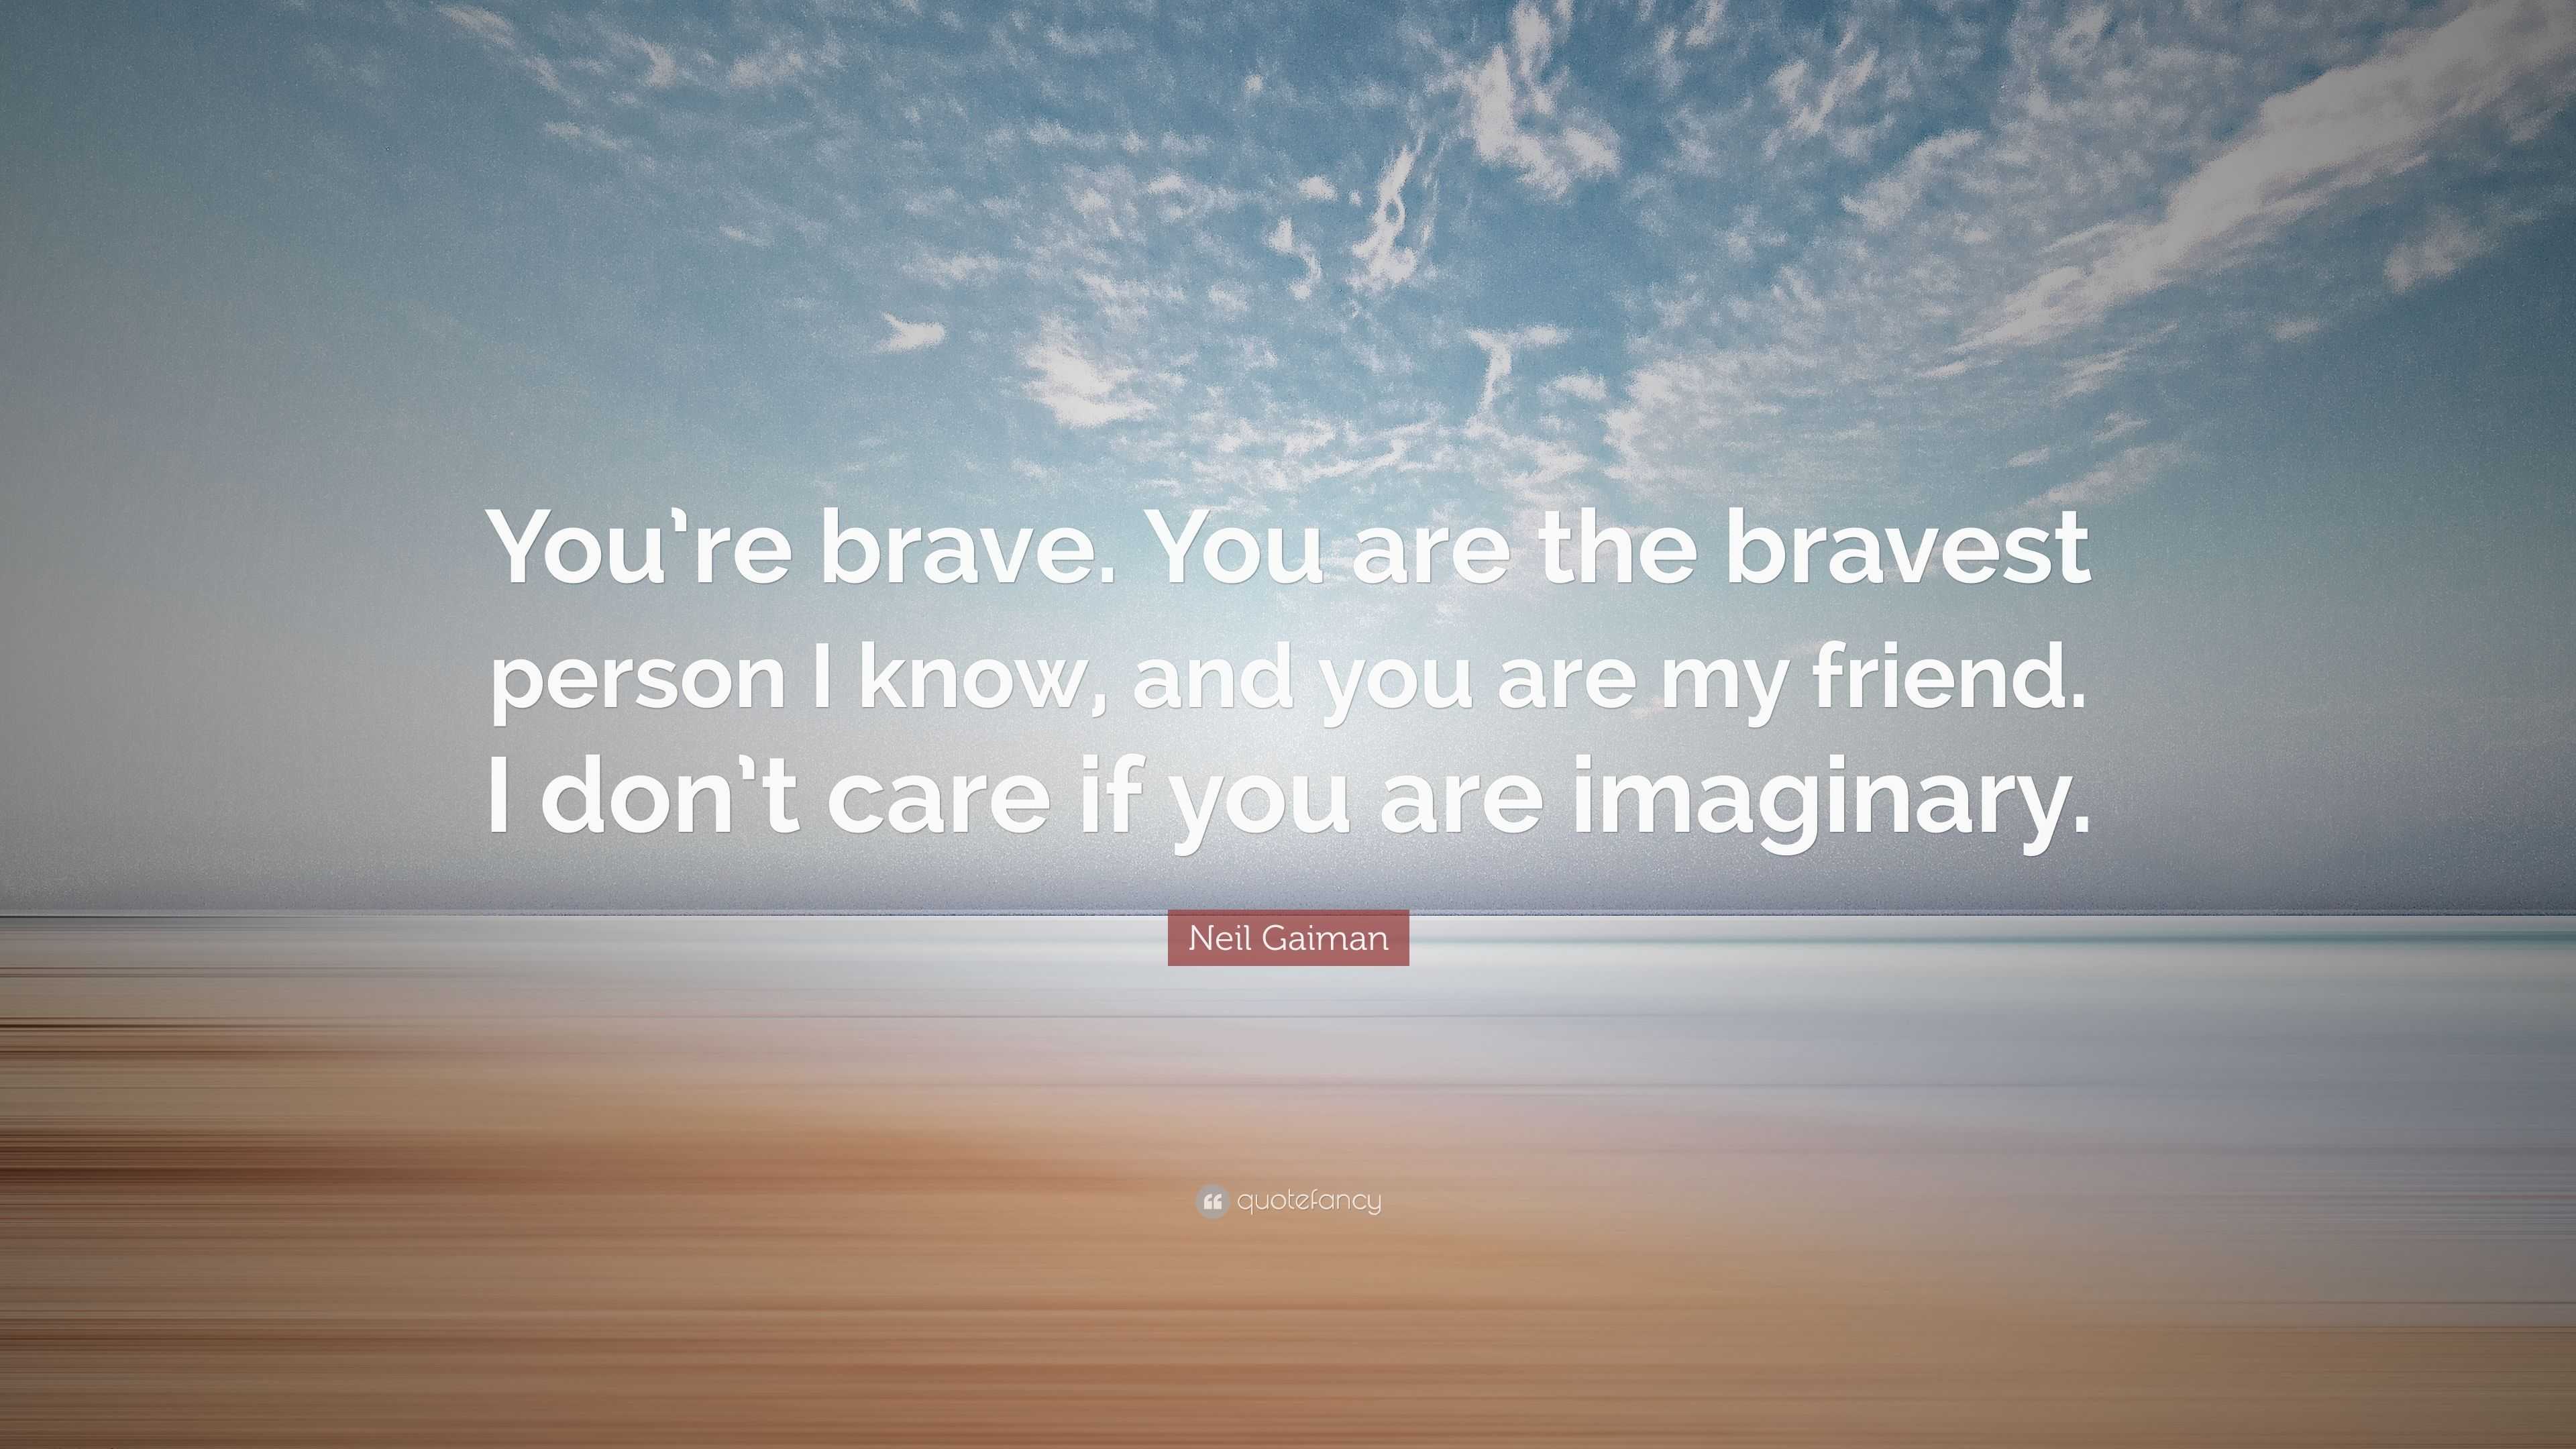 The Bravest People I Know. How do we define bravery? What exactly